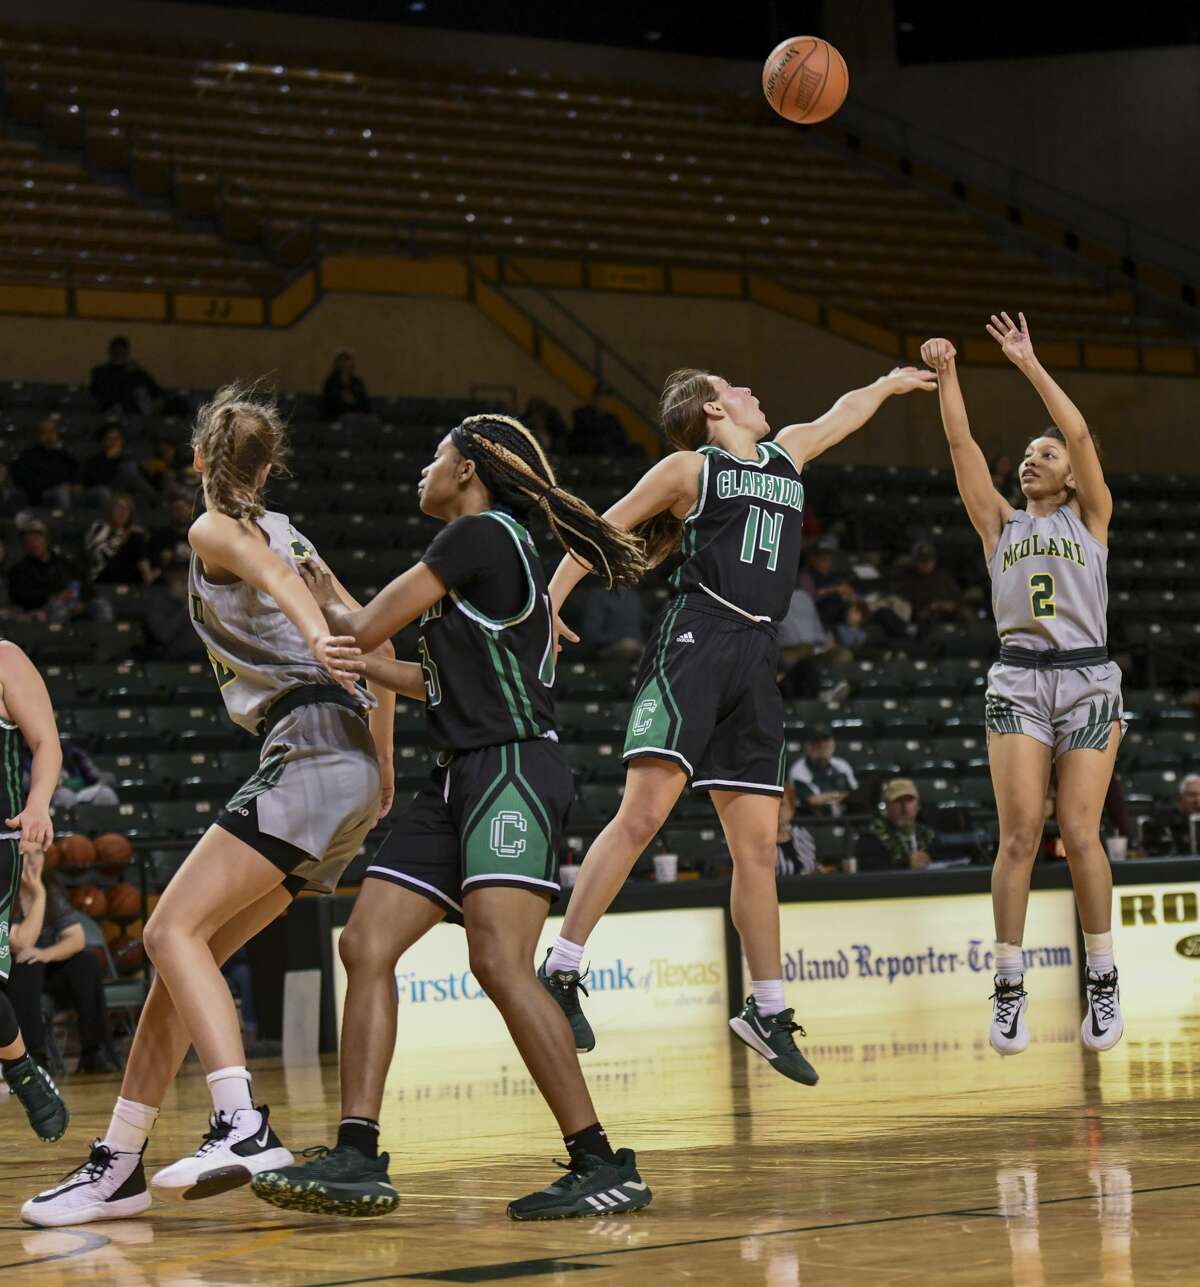 Midland College's Da'Siah Thornton (2) shoots the ball as Clarendon College's Elisa Priddy (14) attempts to block the shot as Midland College's Michaela Kucera and Clarendon College's LyTia Flowers set up for the rebound Thursday, Jan. 23, 2020 at Chaparral Center.